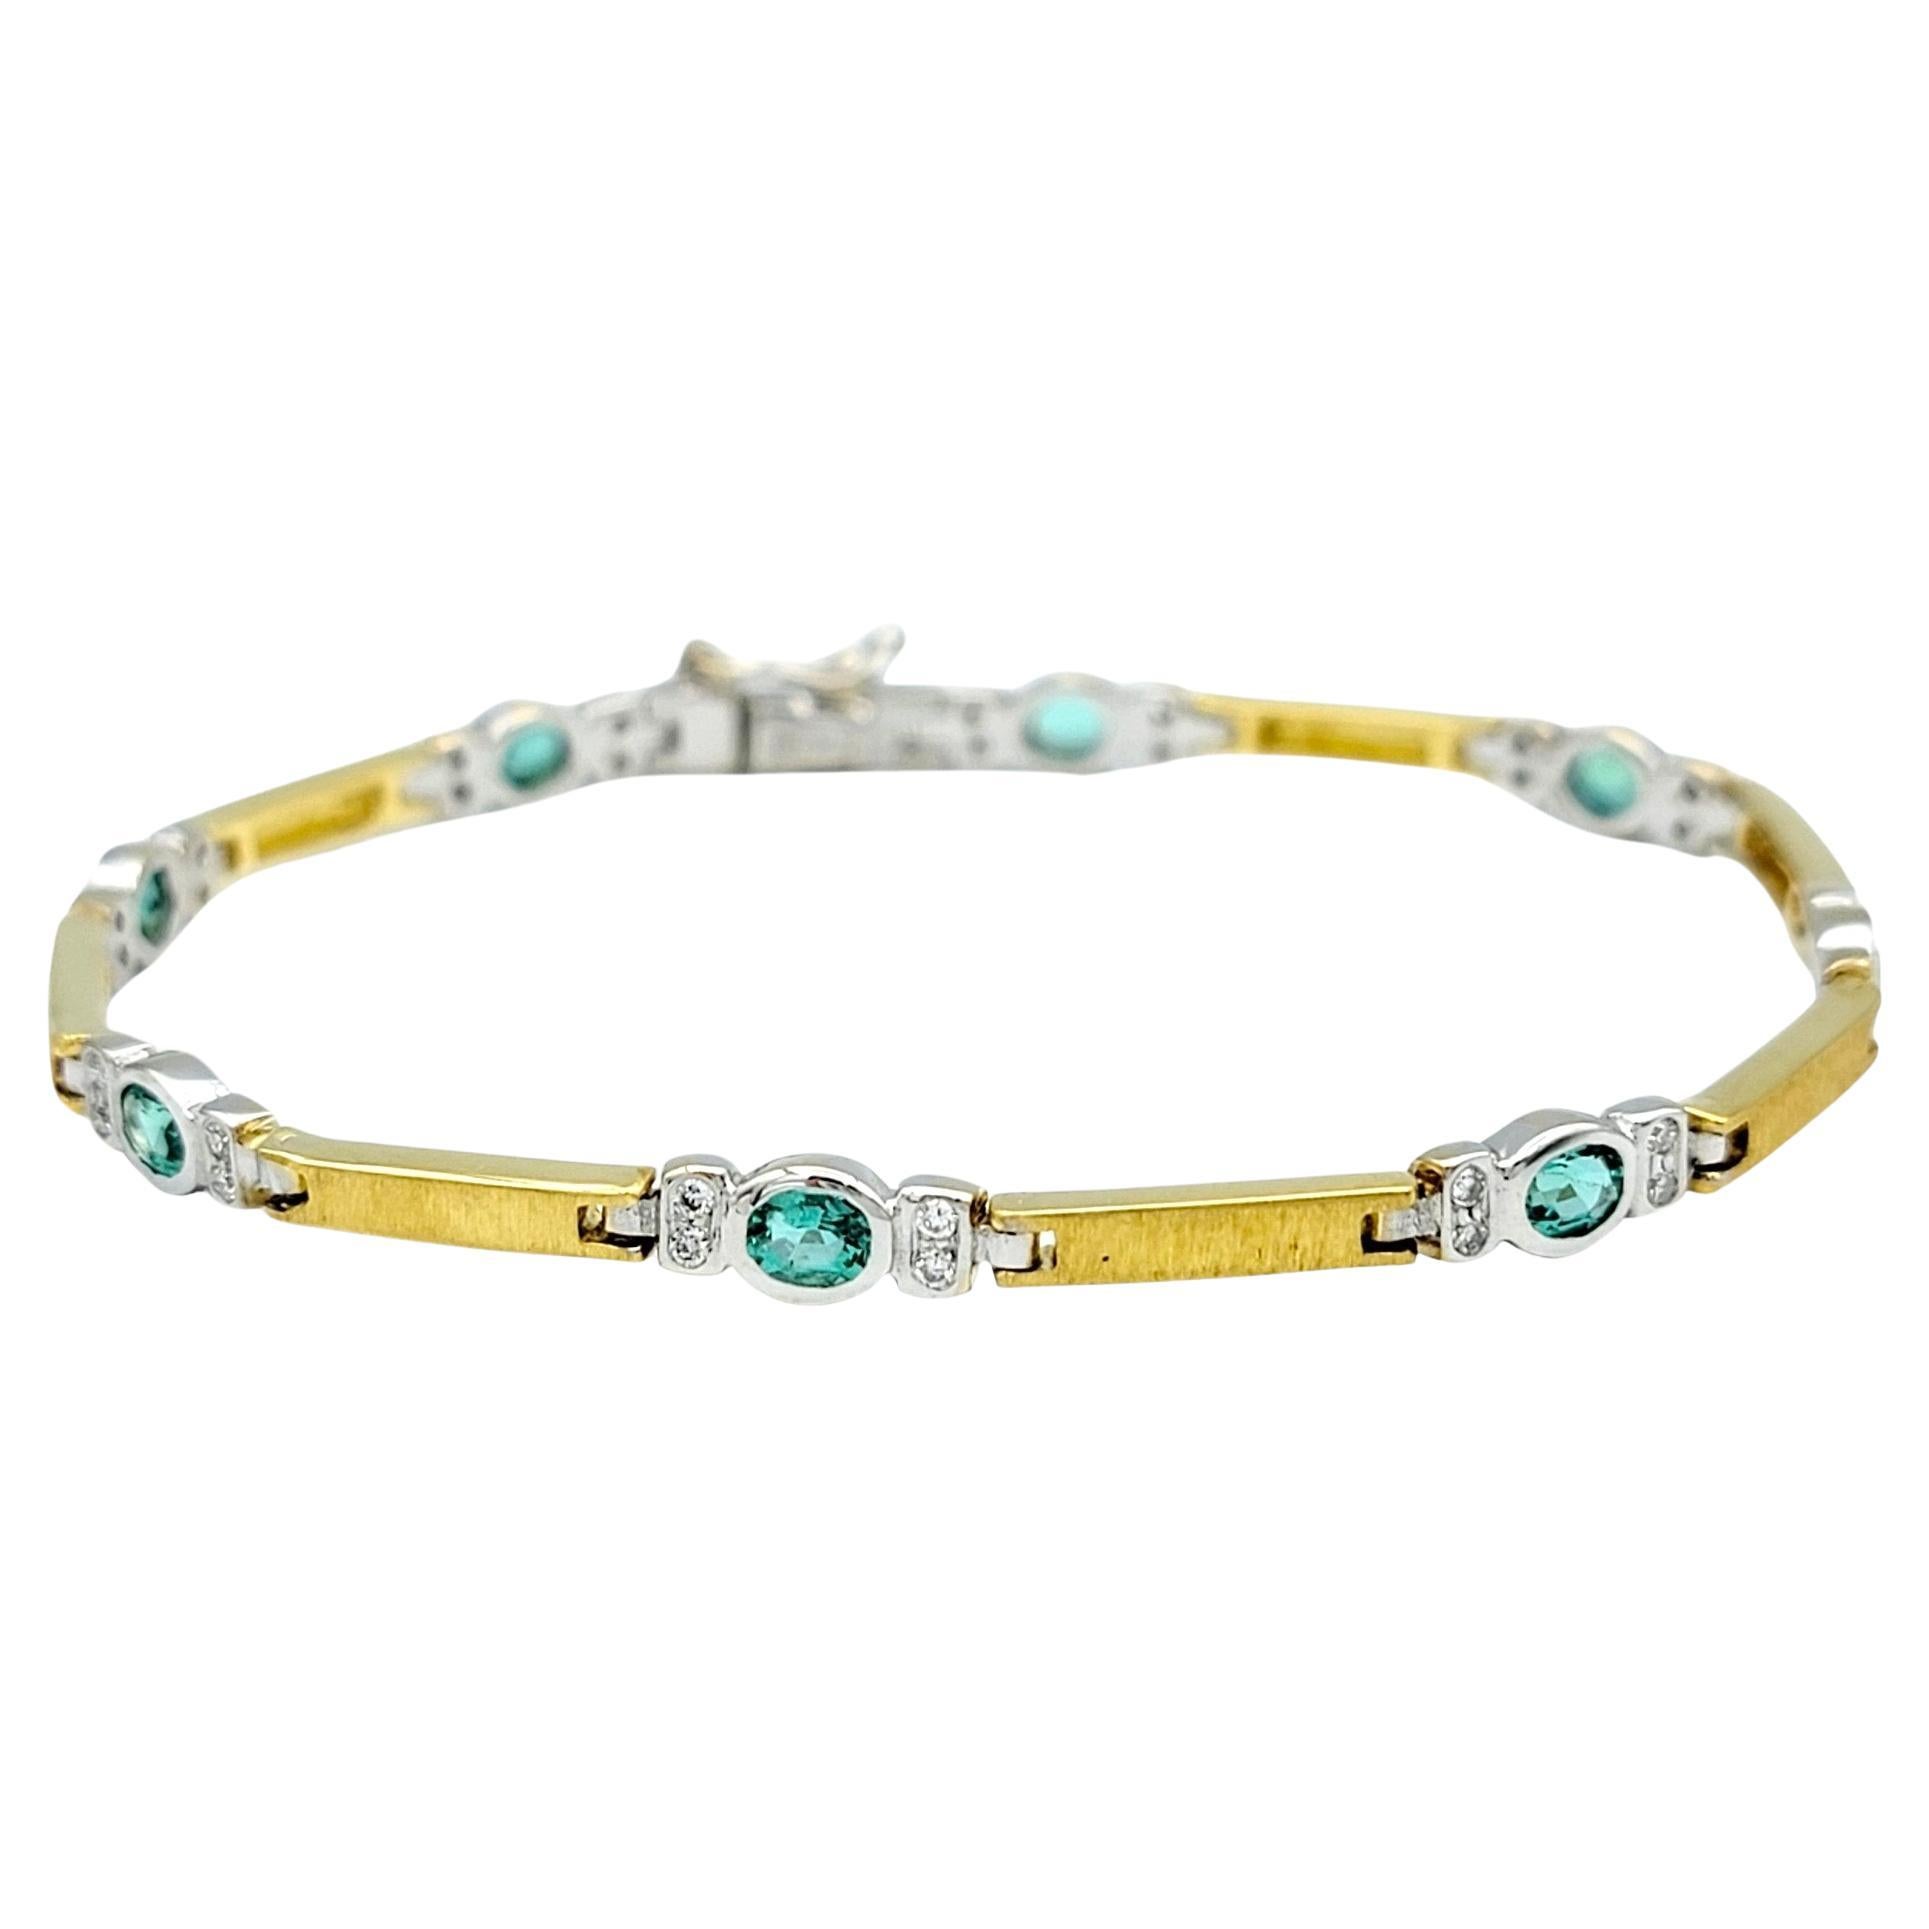 The inner circumference of this bracelet measures 6.88 inches and will comfortably fit a 6.25 - 6.75 inch wrist. 

This beautiful tourmaline and diamond link bracelet, crafted in luxurious 18 karat yellow and white gold, presents a stunning